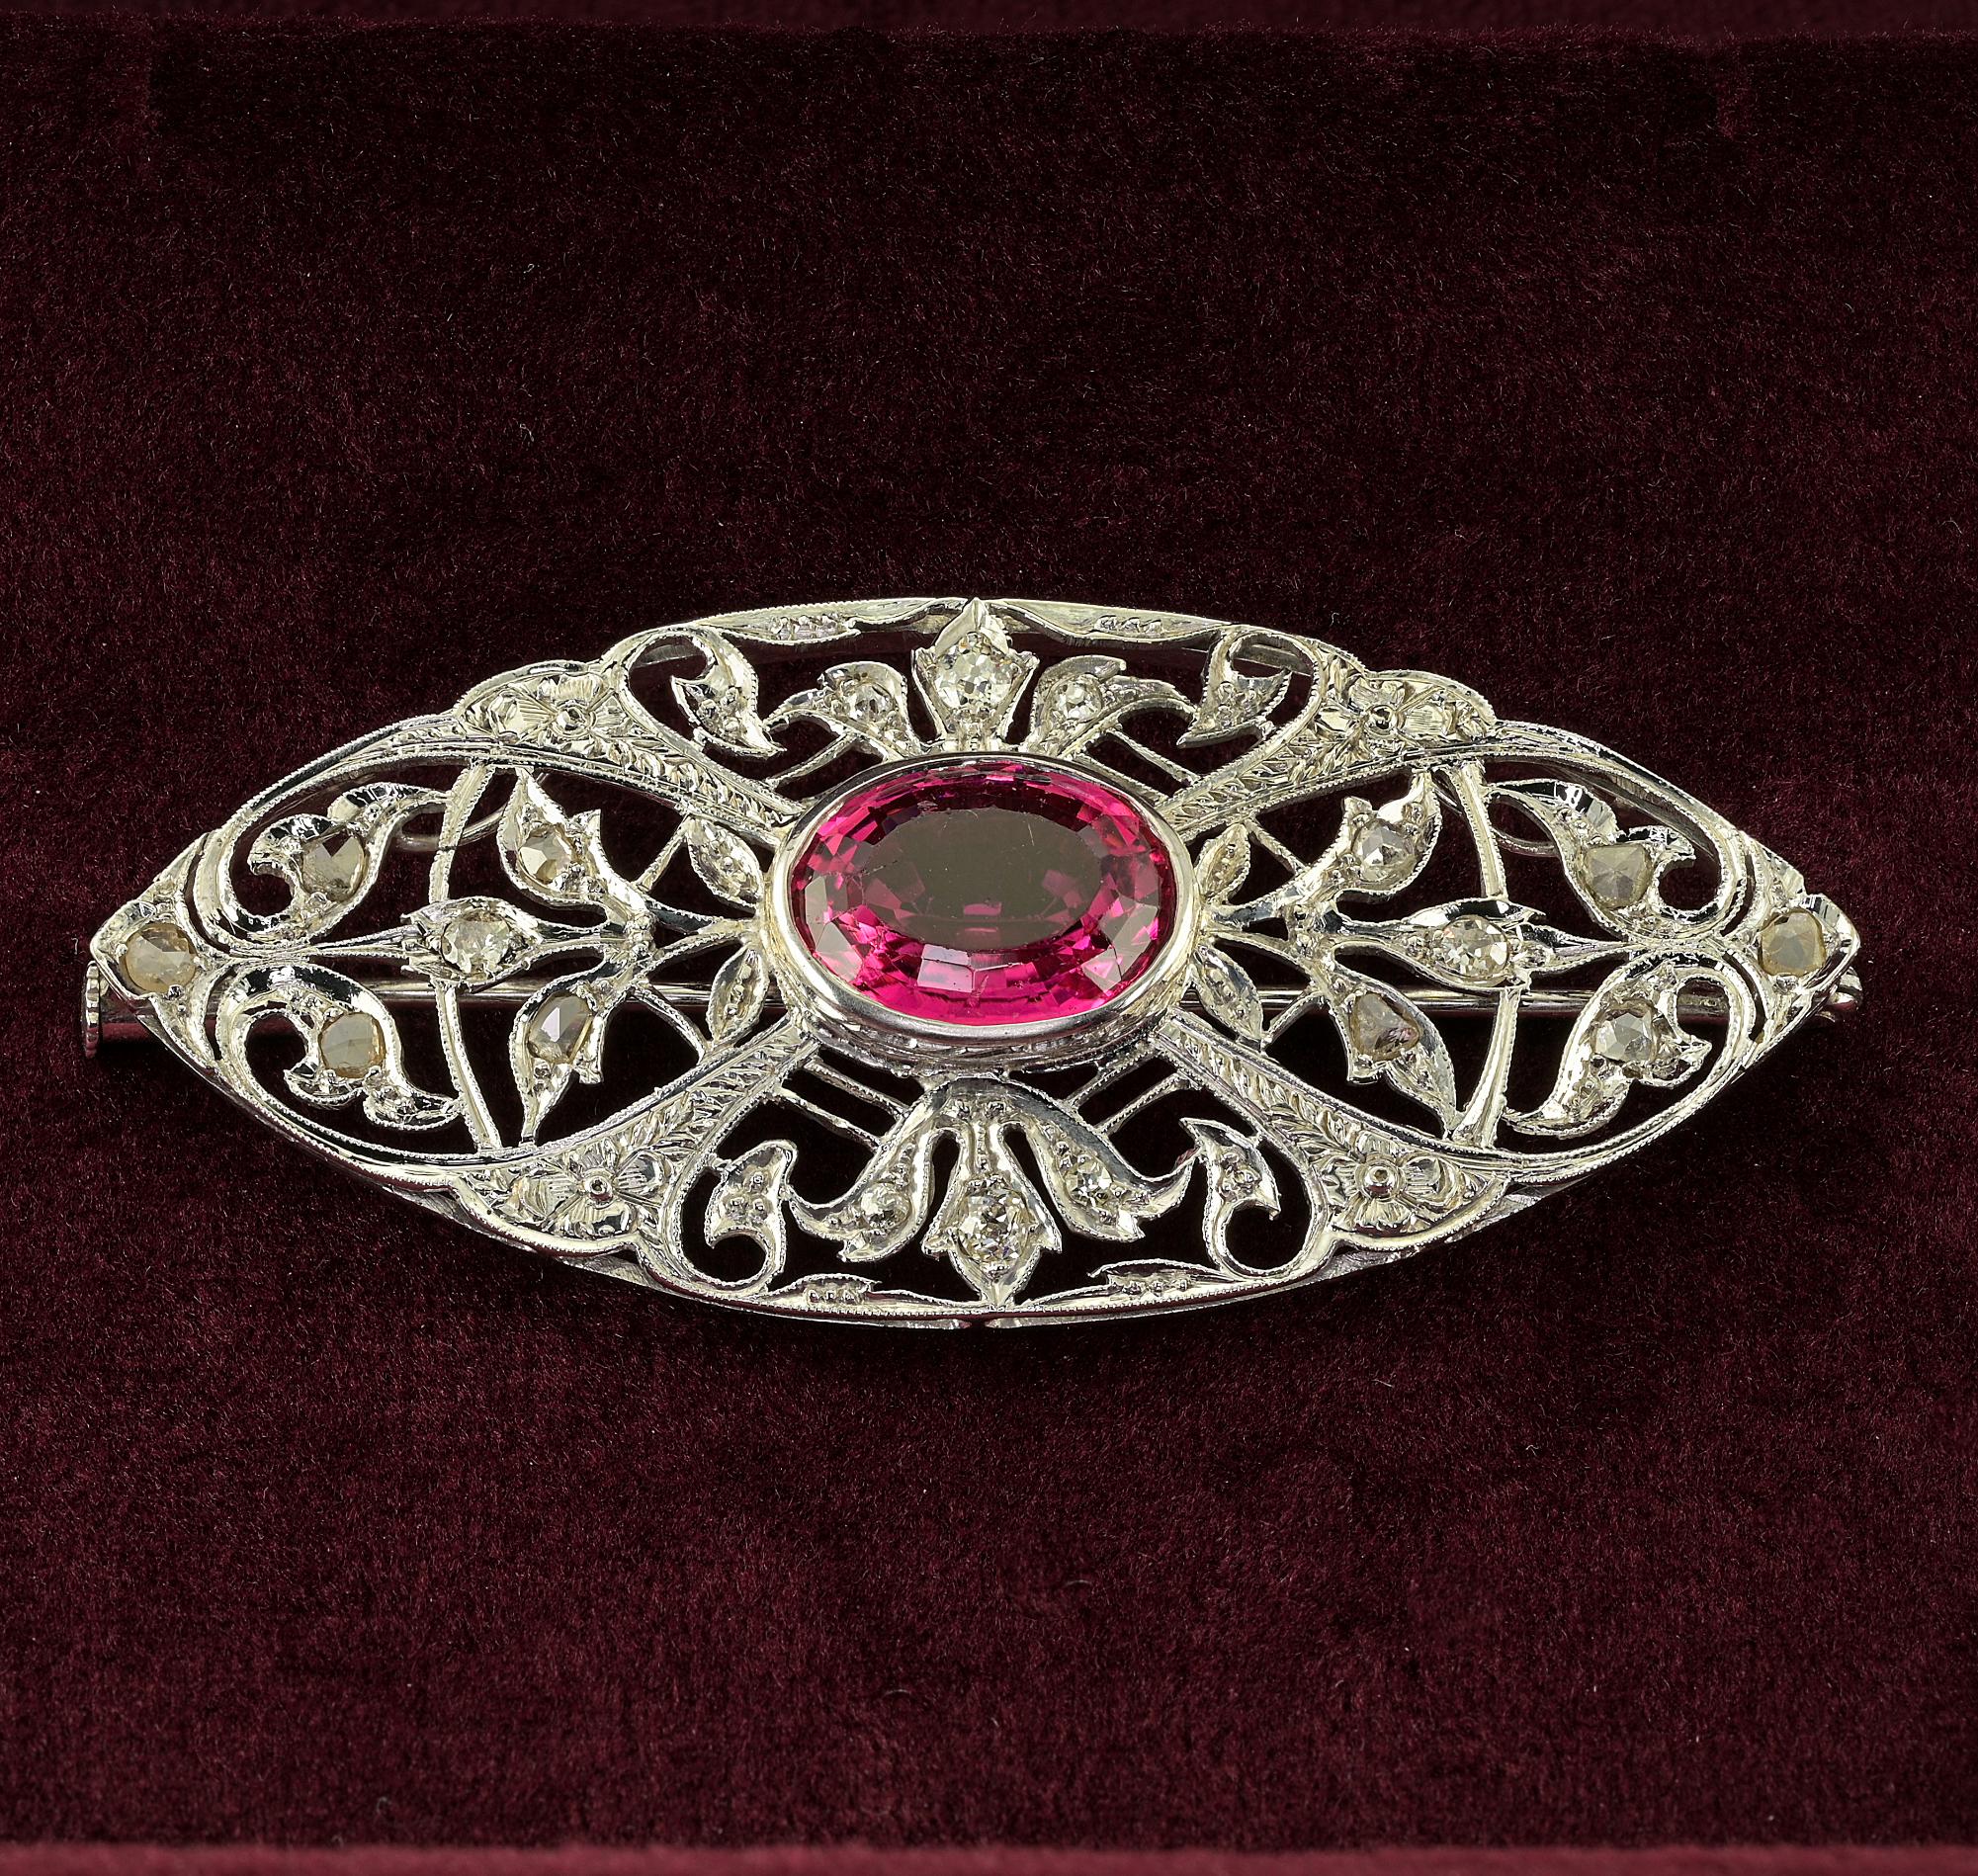 This outstanding Edwardian period Filigree brooch is 1910 ca
Impressive, intricate open filigree art work, resembling scrolls and leaf motifs finely detailed by hand carving and enhanced throughout by white sparkly Diamonds
Elegant  expression of